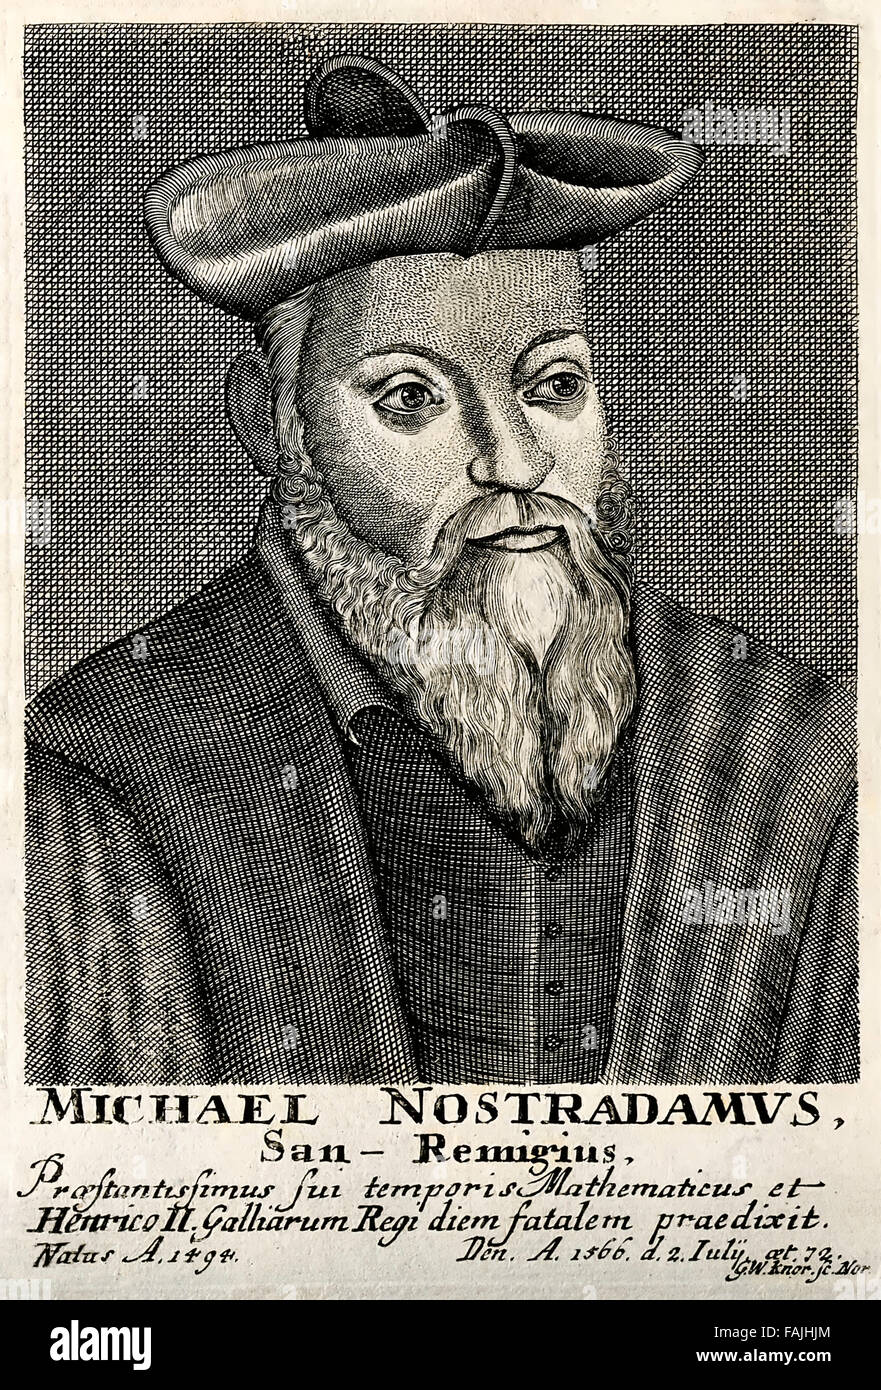 Portrait of Michel Nostradamus (1503-1566), engraving by G.W. Knorr. See description for more information. Stock Photo